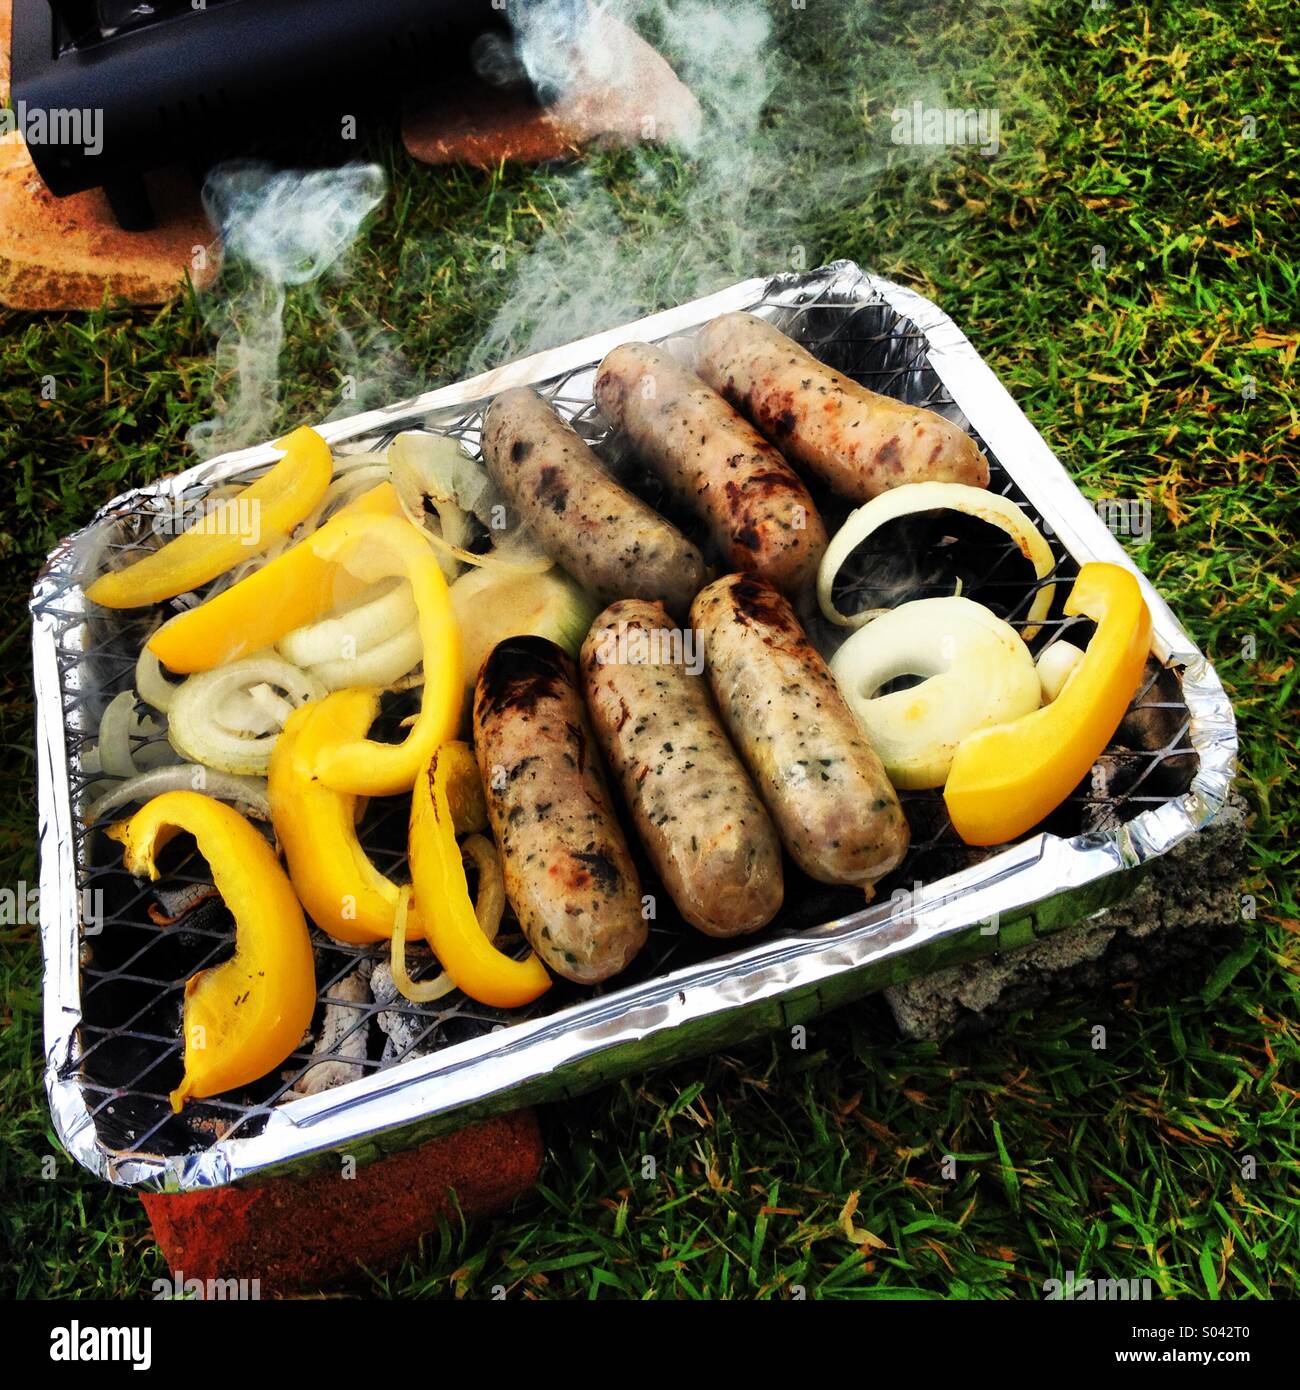 Sausages, onions and peppers in disposable barbecque, while camping. Stock Photo